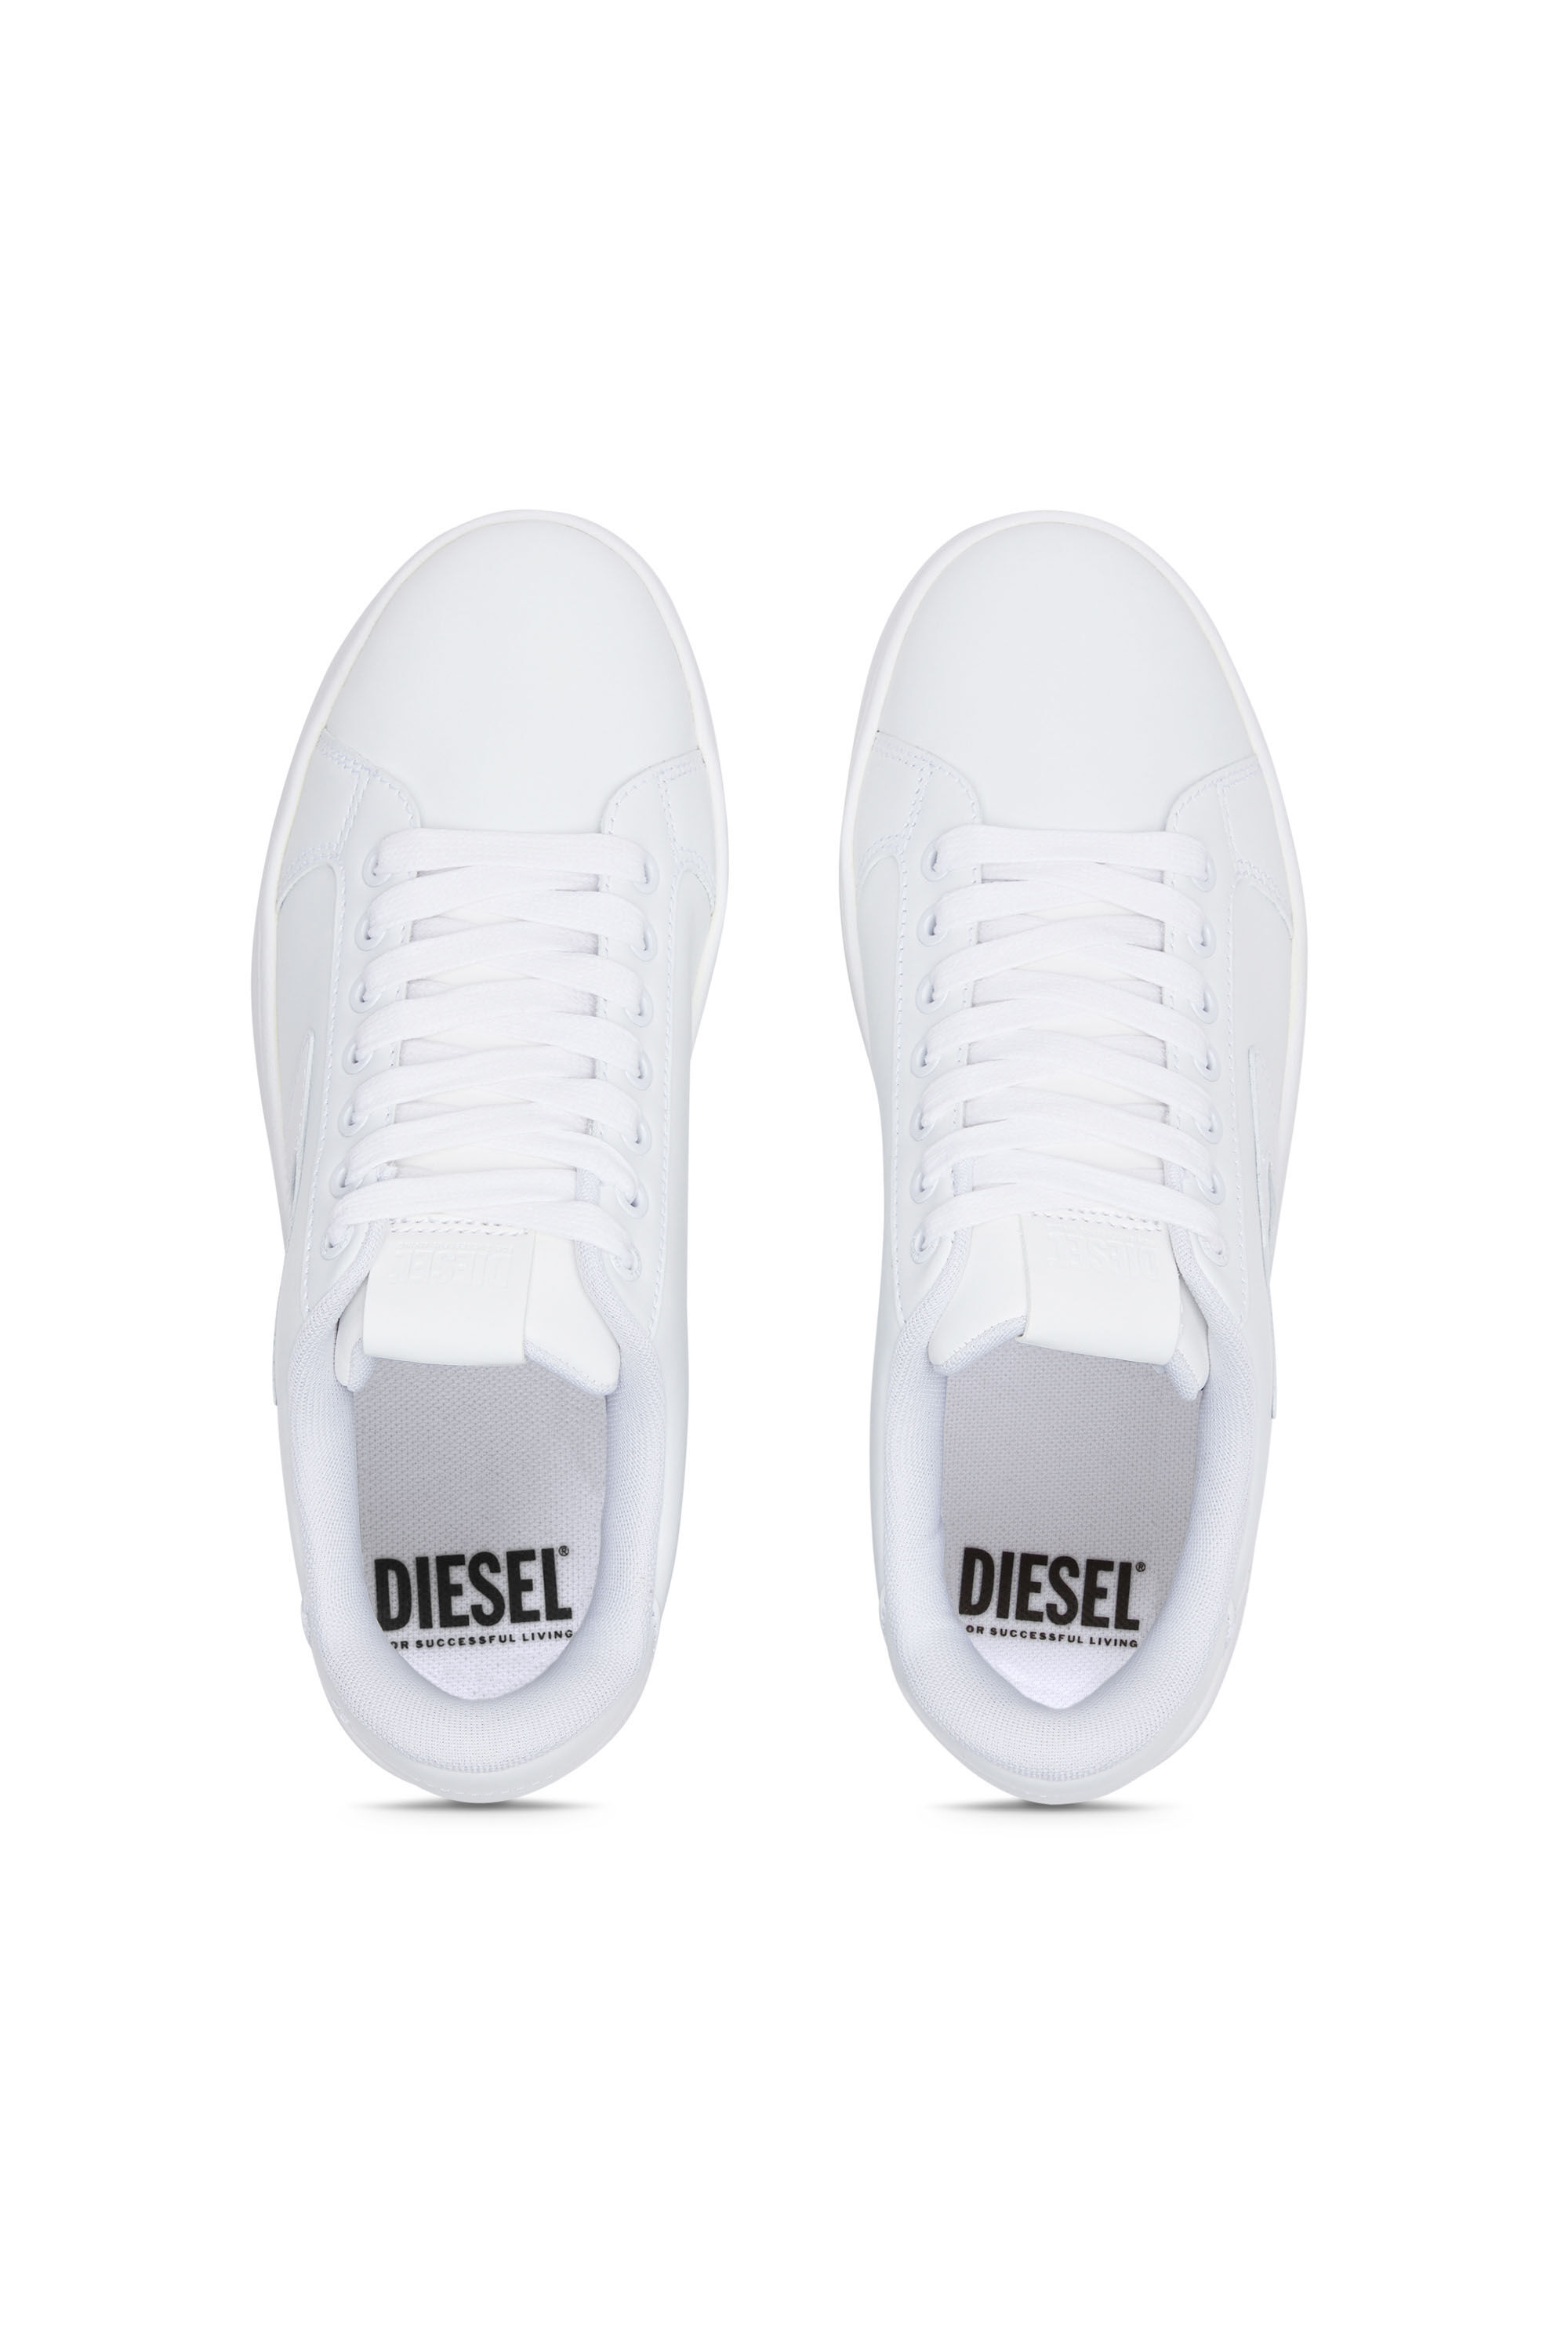 S-ATHENE BOLD X Woman: Flatform sneakers in leather | Diesel